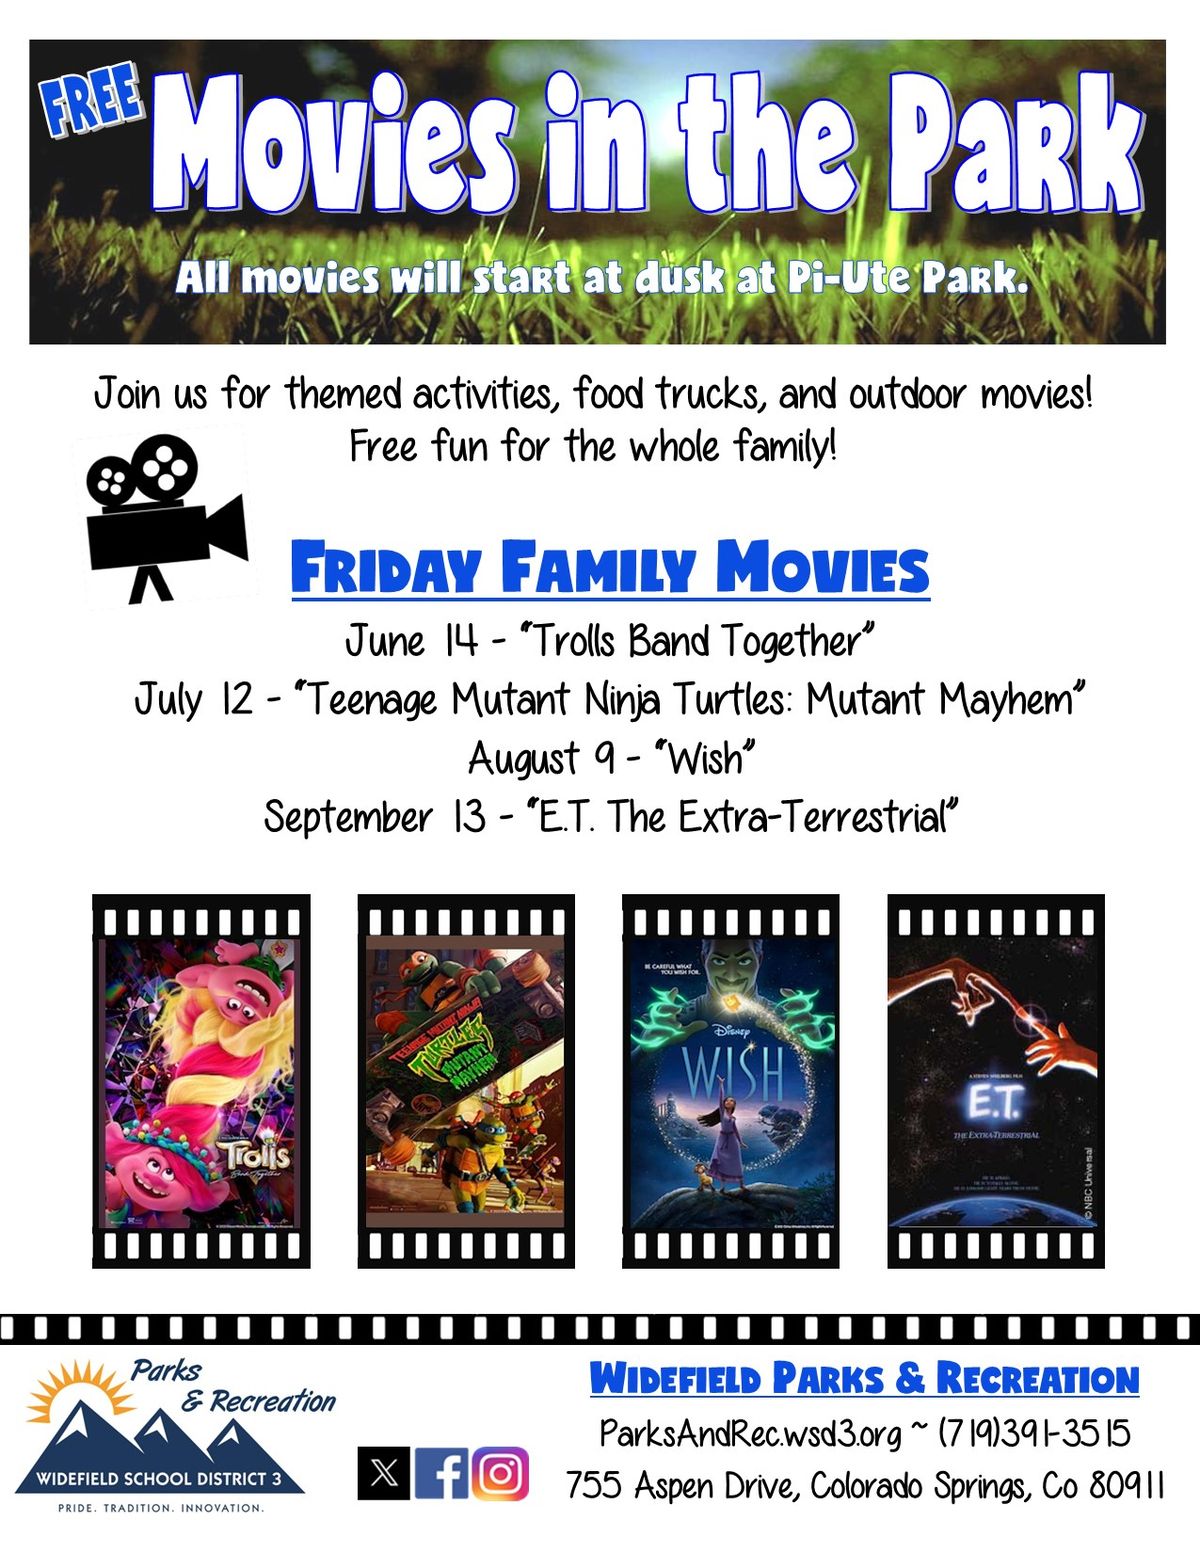 Movie In the Park @ Dusk - "E.T. The Extra-Terrestrial"